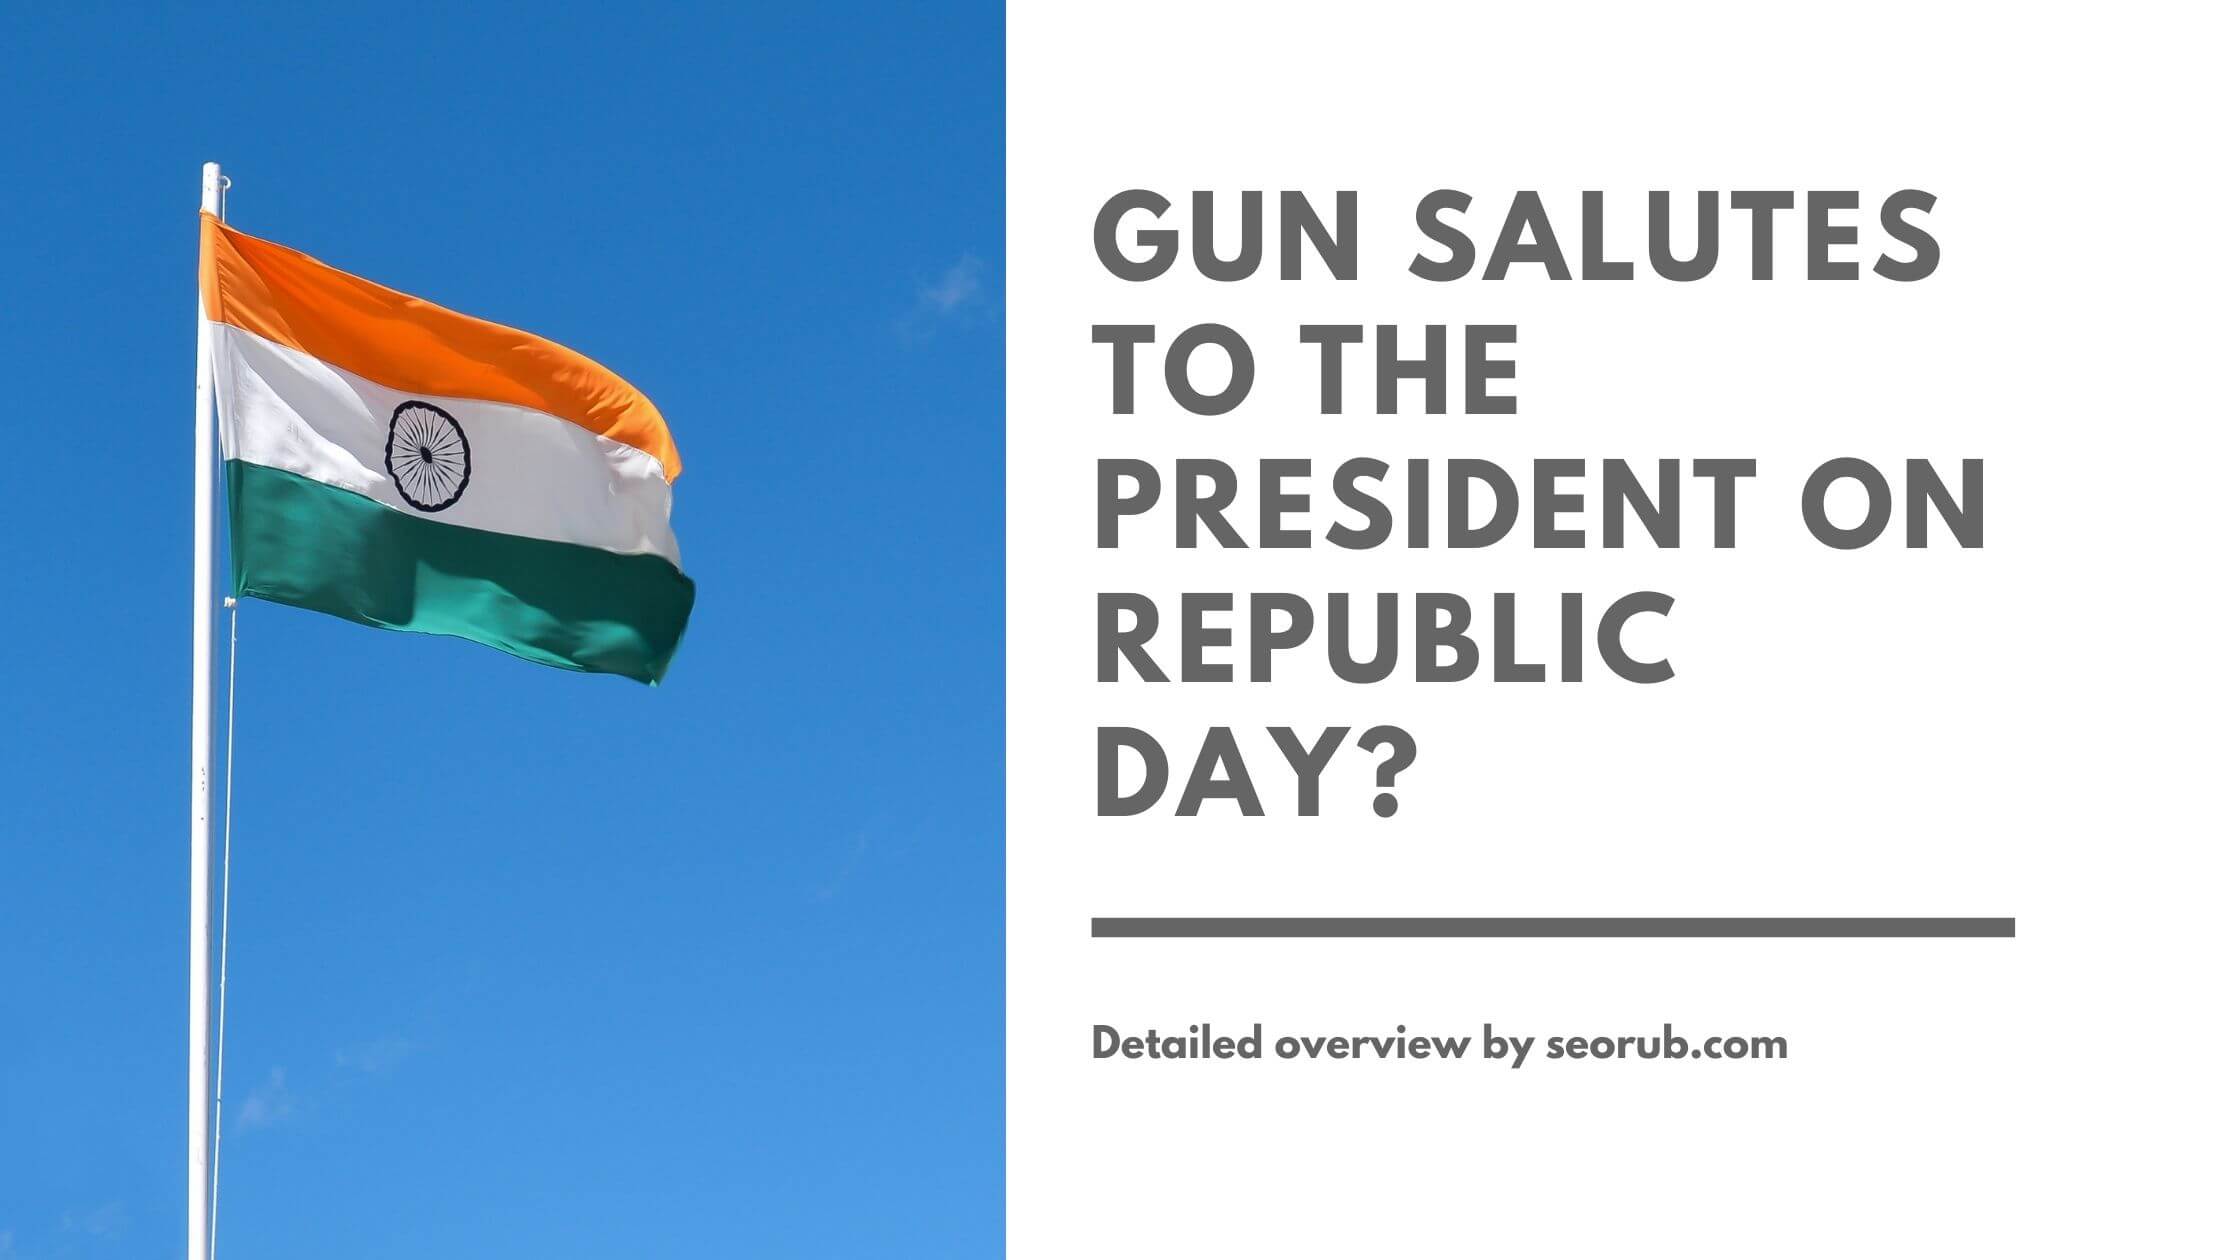 How many gun salutes are presented to the president on republic day?